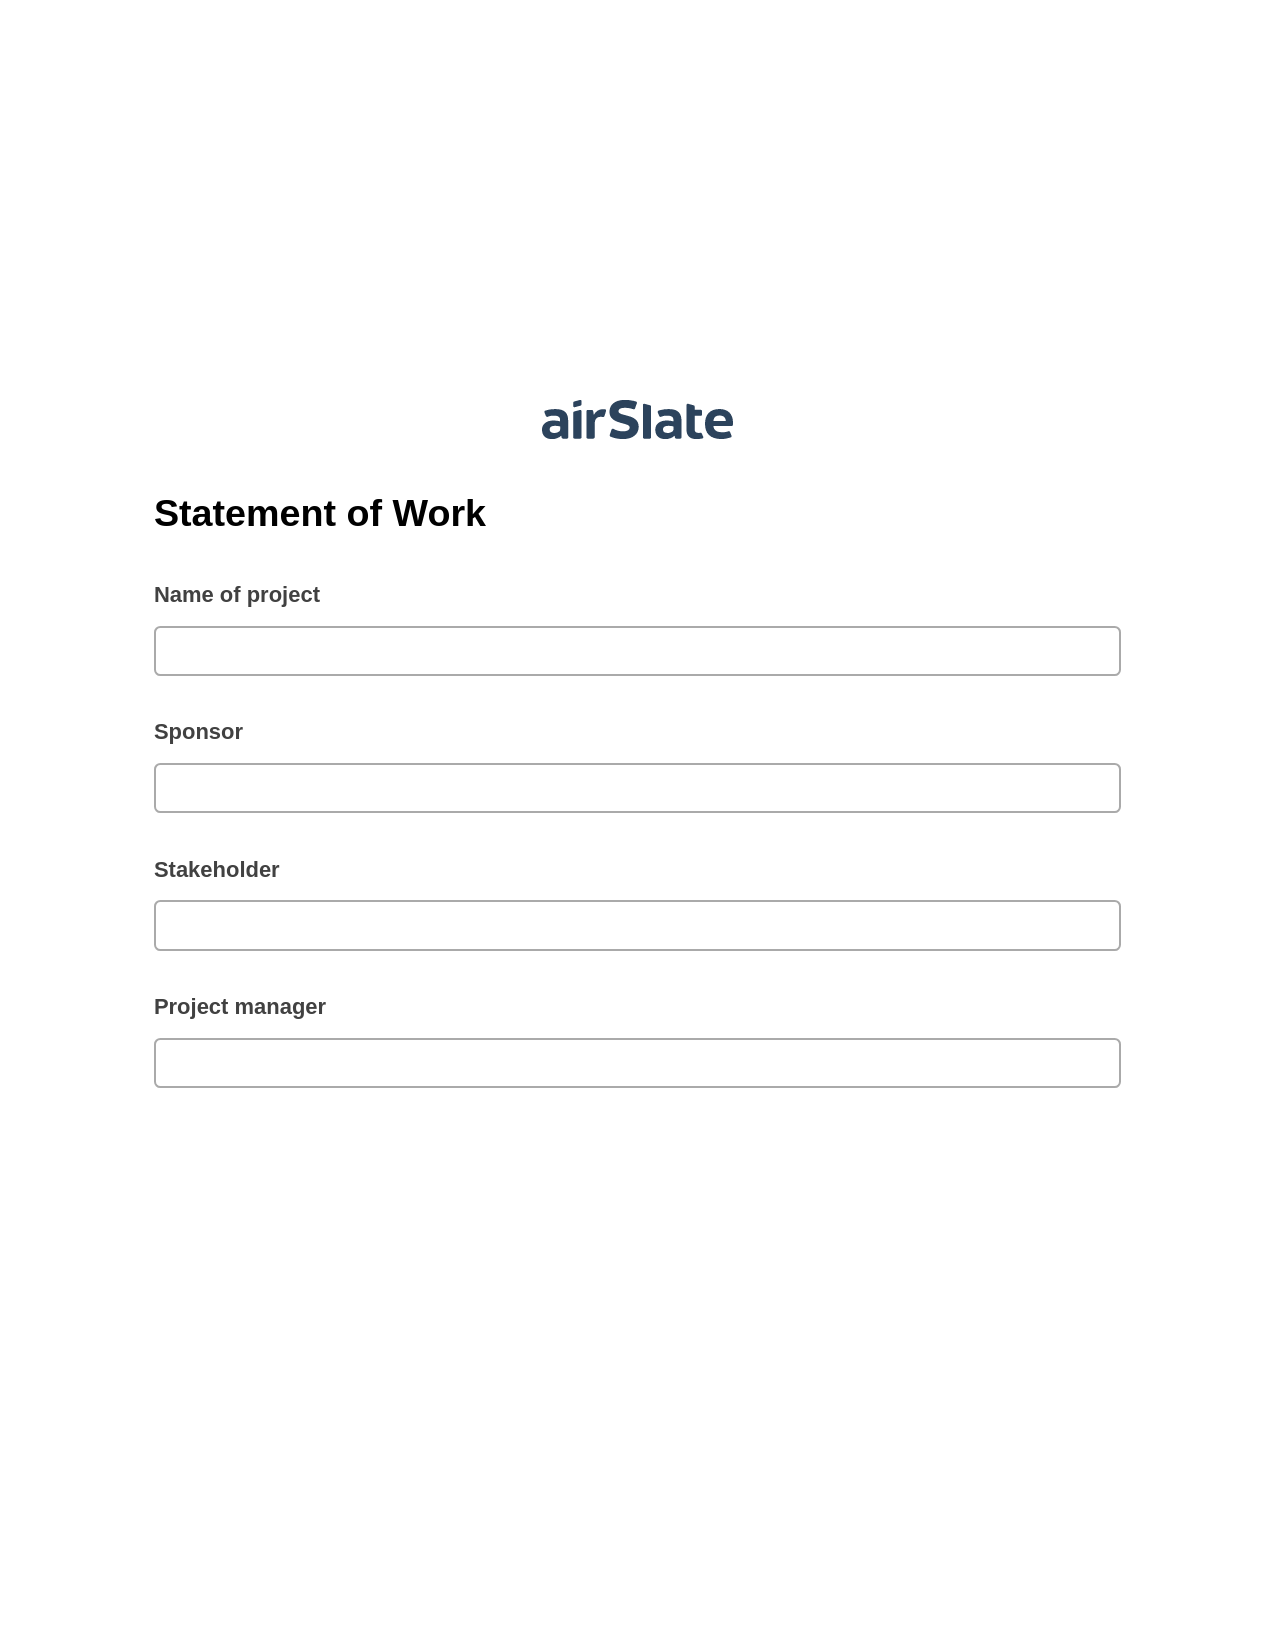 Multirole Statement of Work Pre-fill from another Slate Bot, Add Tags to Slate Bot, OneDrive Bot